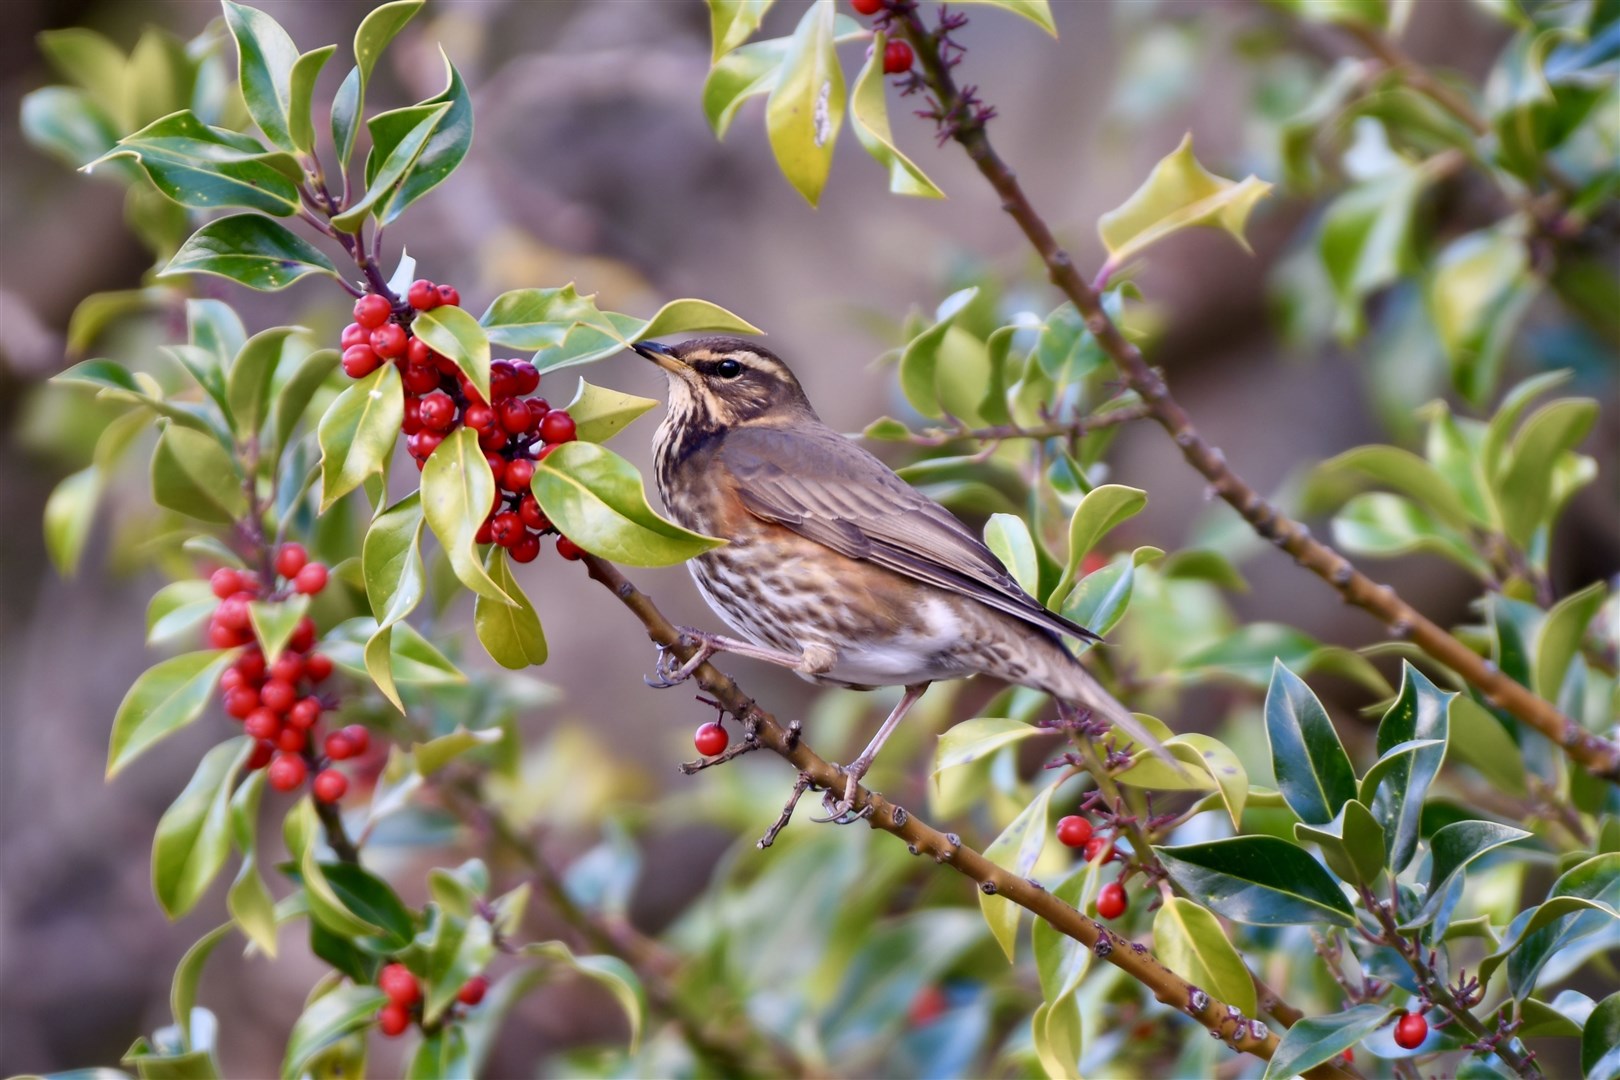 Hazel Thomson took these pictures of redwings enjoying berries on a tree in Elgin.